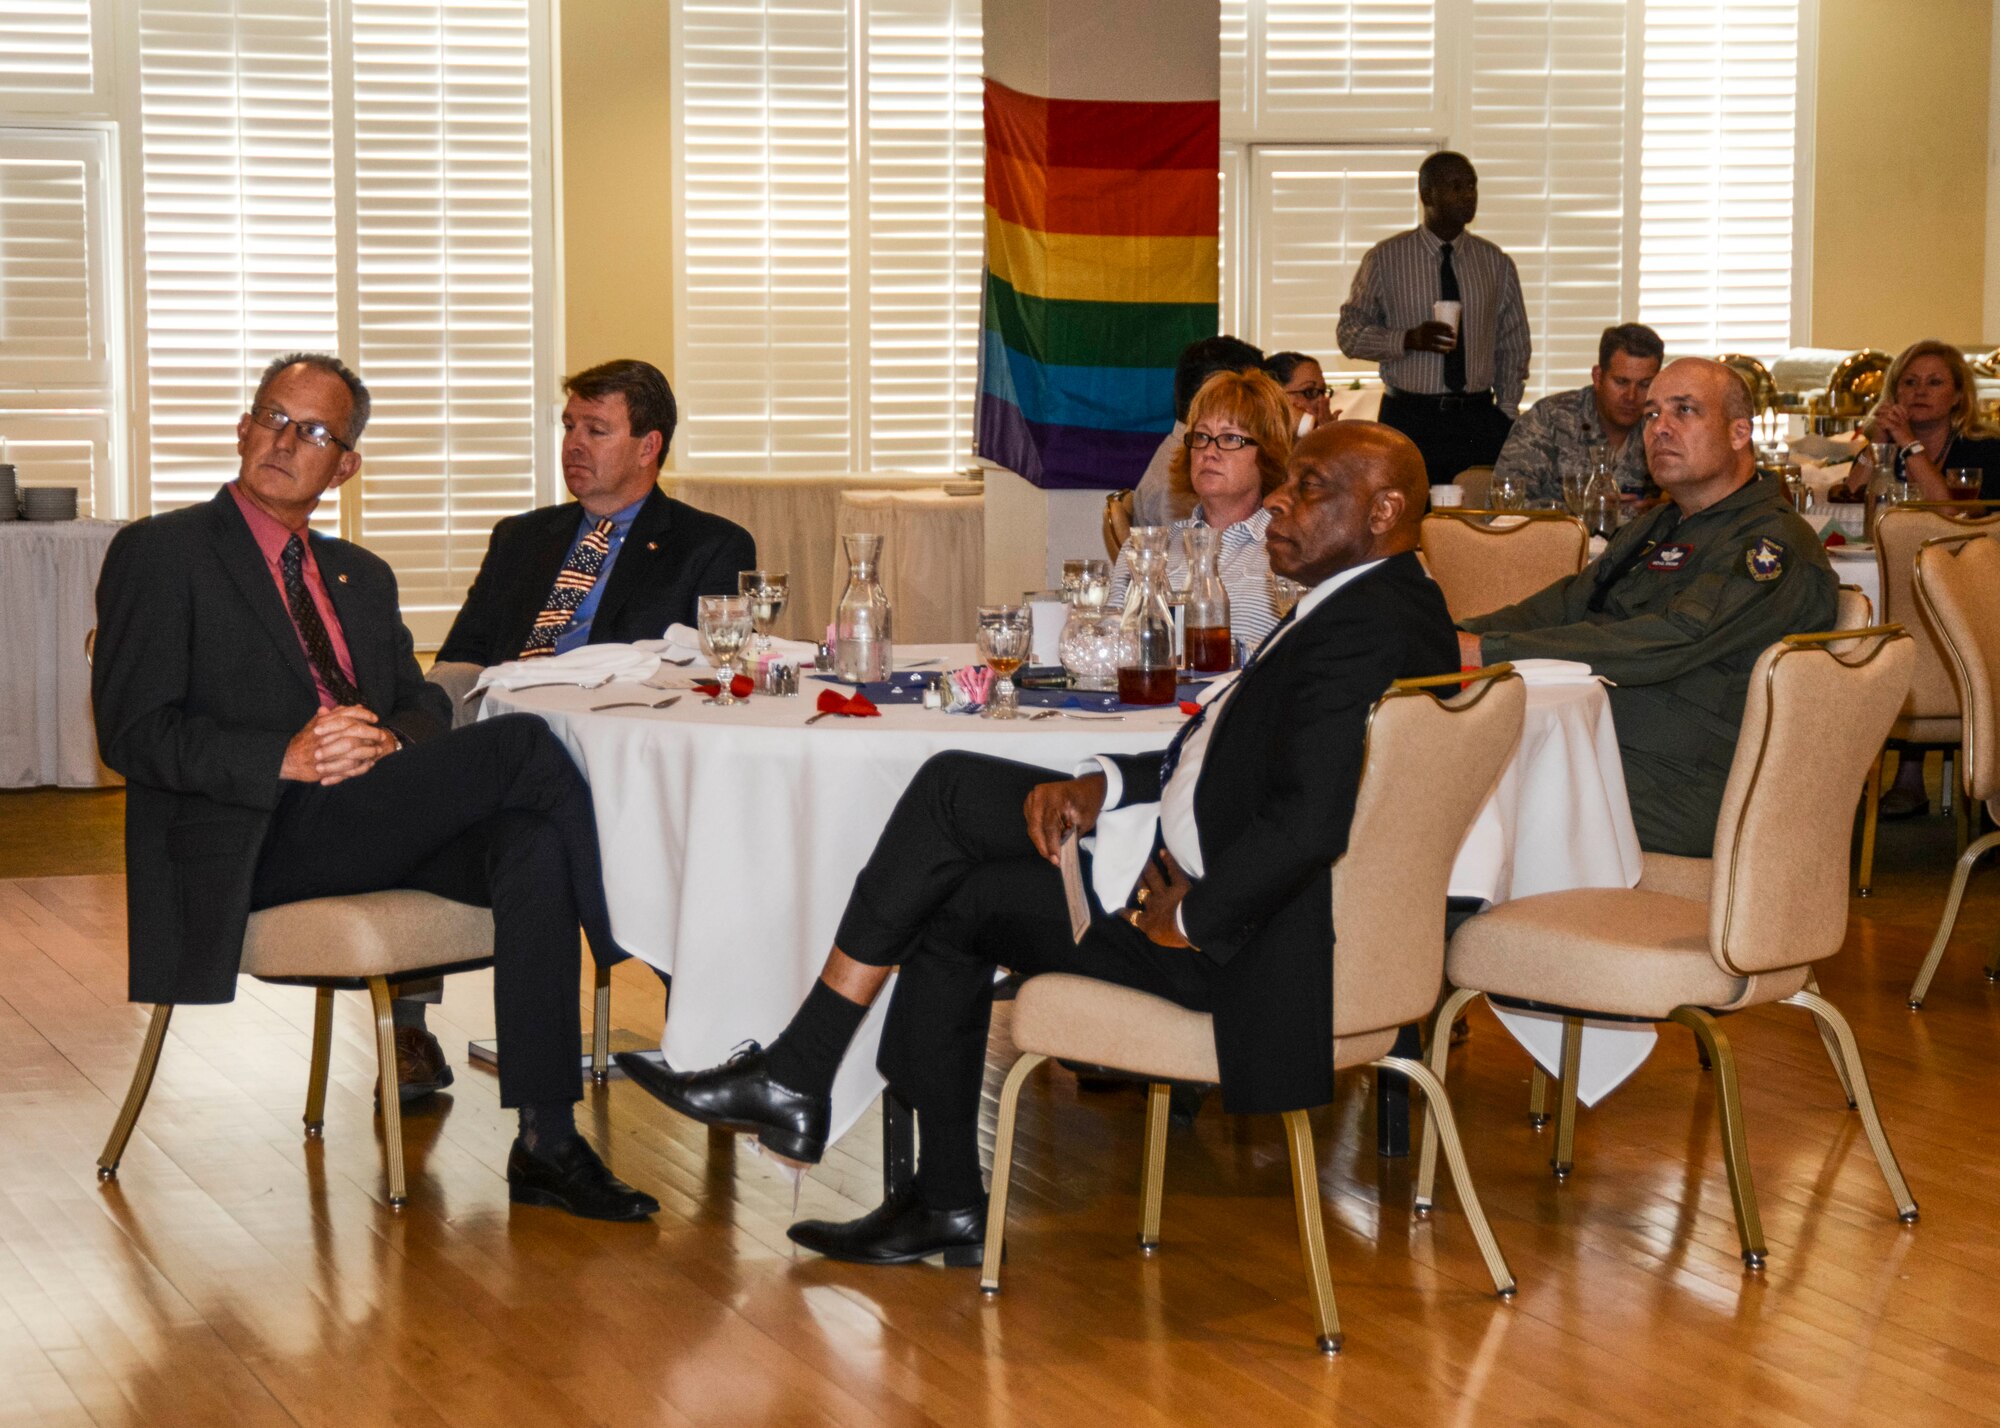 Team Edwards was invited to attend a pride luncheon for the Lesbian, Gay, Bisexual and Transgender community during LGBT Awareness Month June 26 at Club Muroc,  (U.S. Air Force photo by Rebecca Amber)